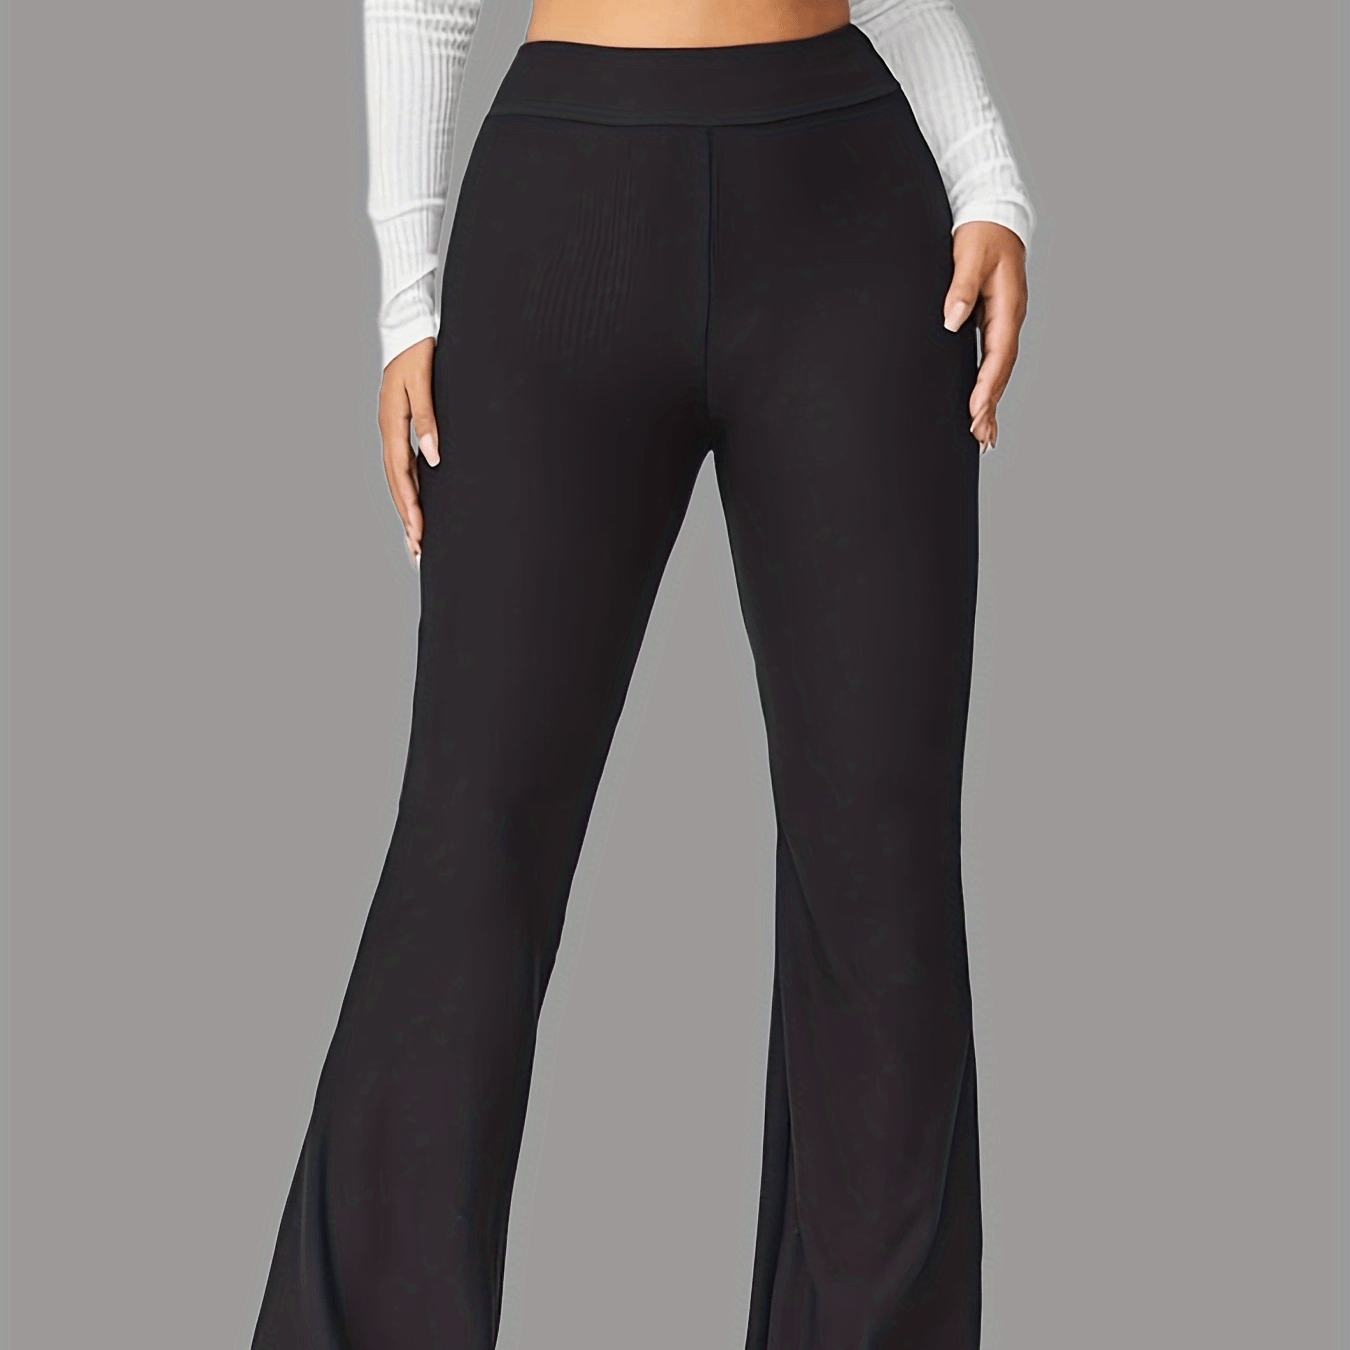 Our Y2K-inspired flared legging just got even more dramatic. With